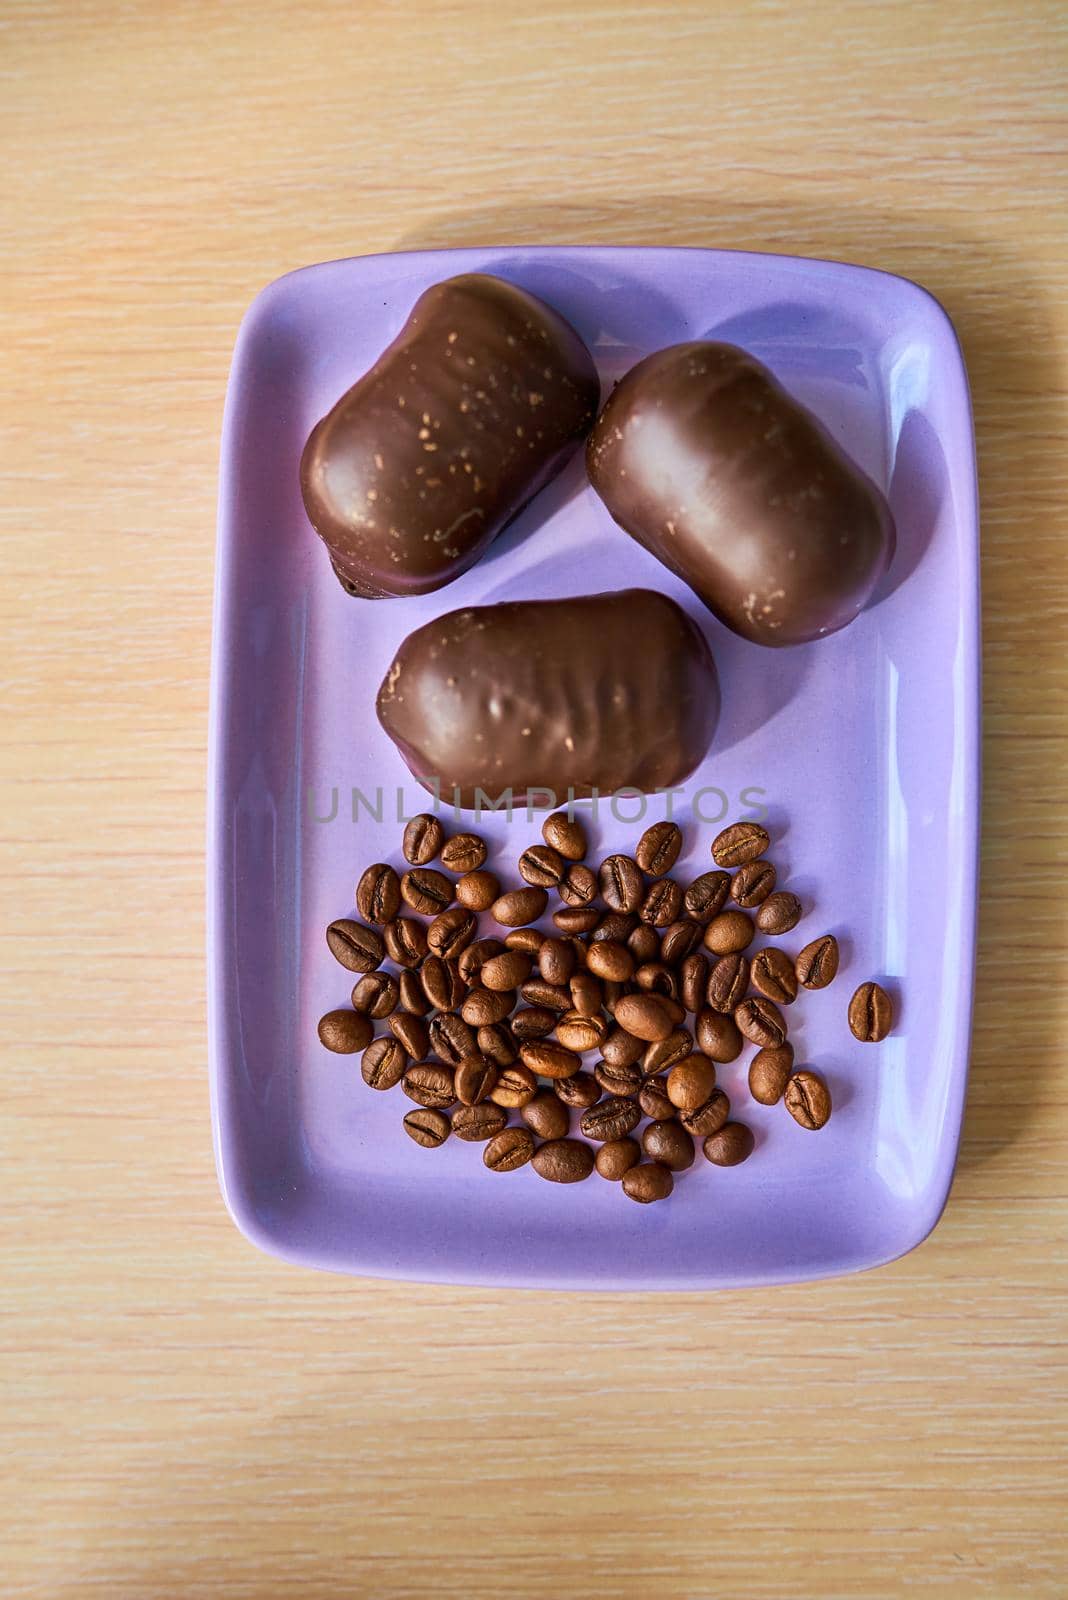 Three chocolates and a handful of coffee beans lie on a purple plate. Top view. Close-up